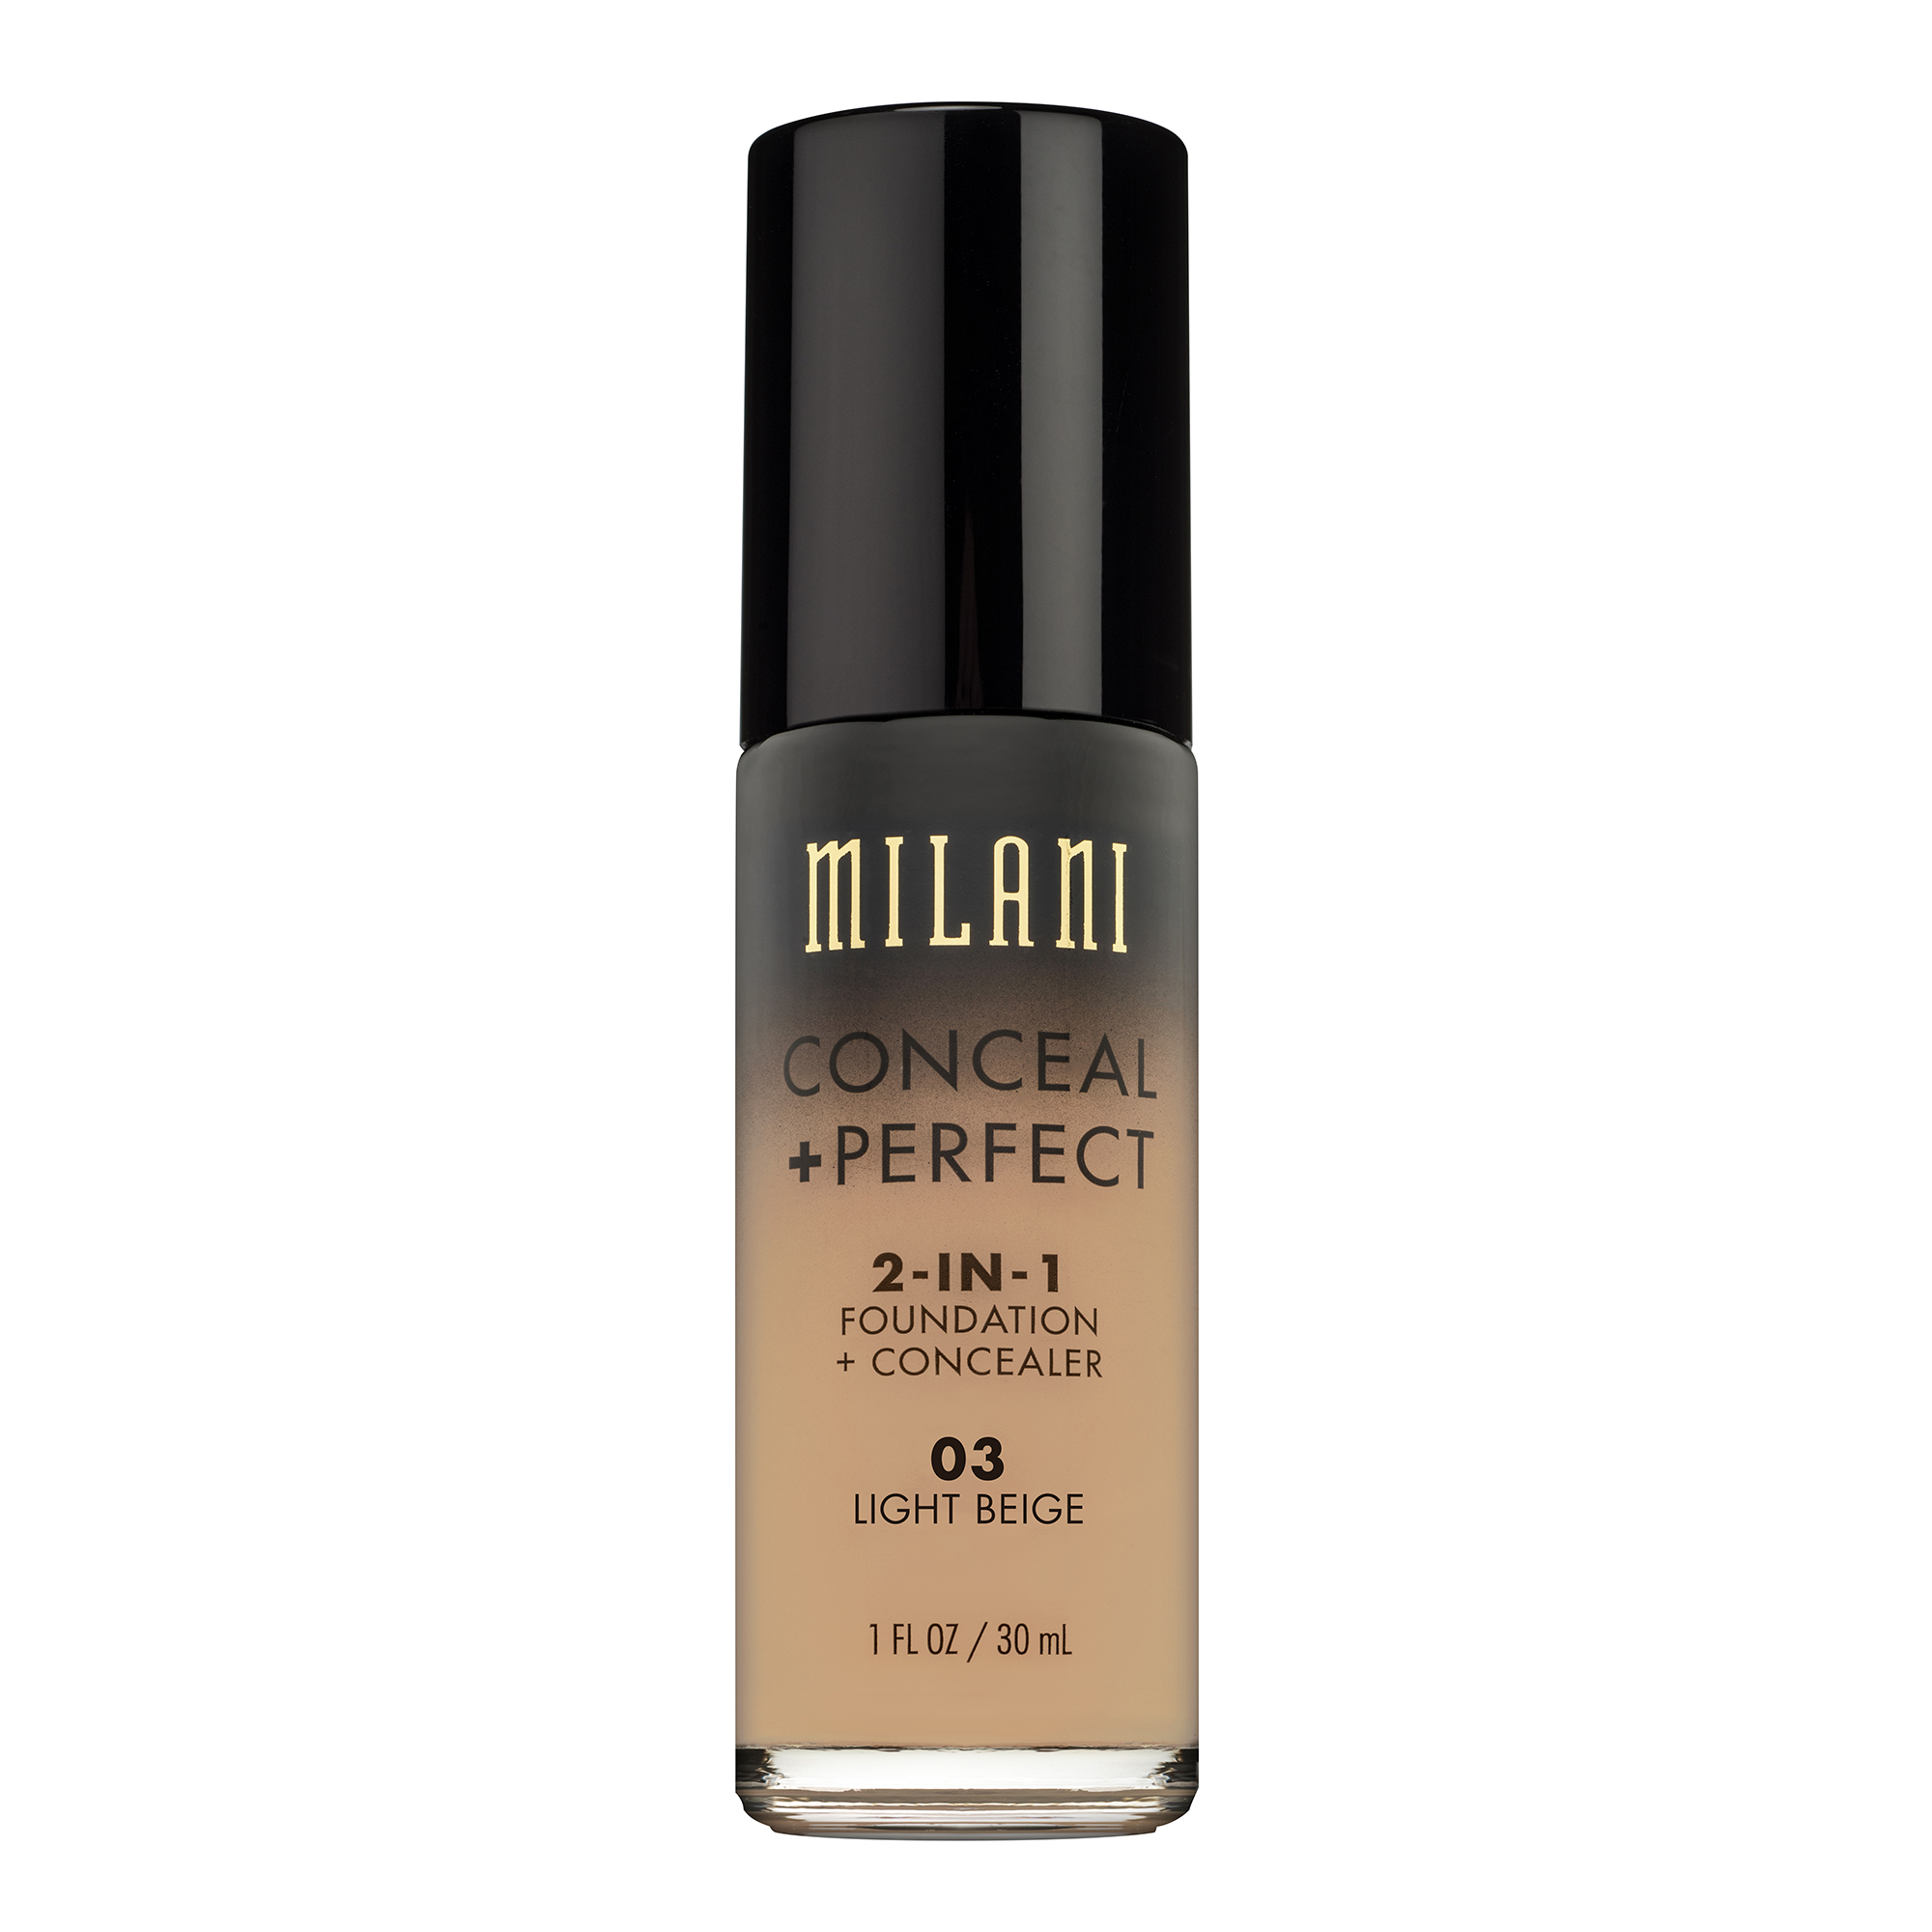 Milani Conceal + Perfect 2-in-1 Foundation + Concealer, Light Beige - image 1 of 2